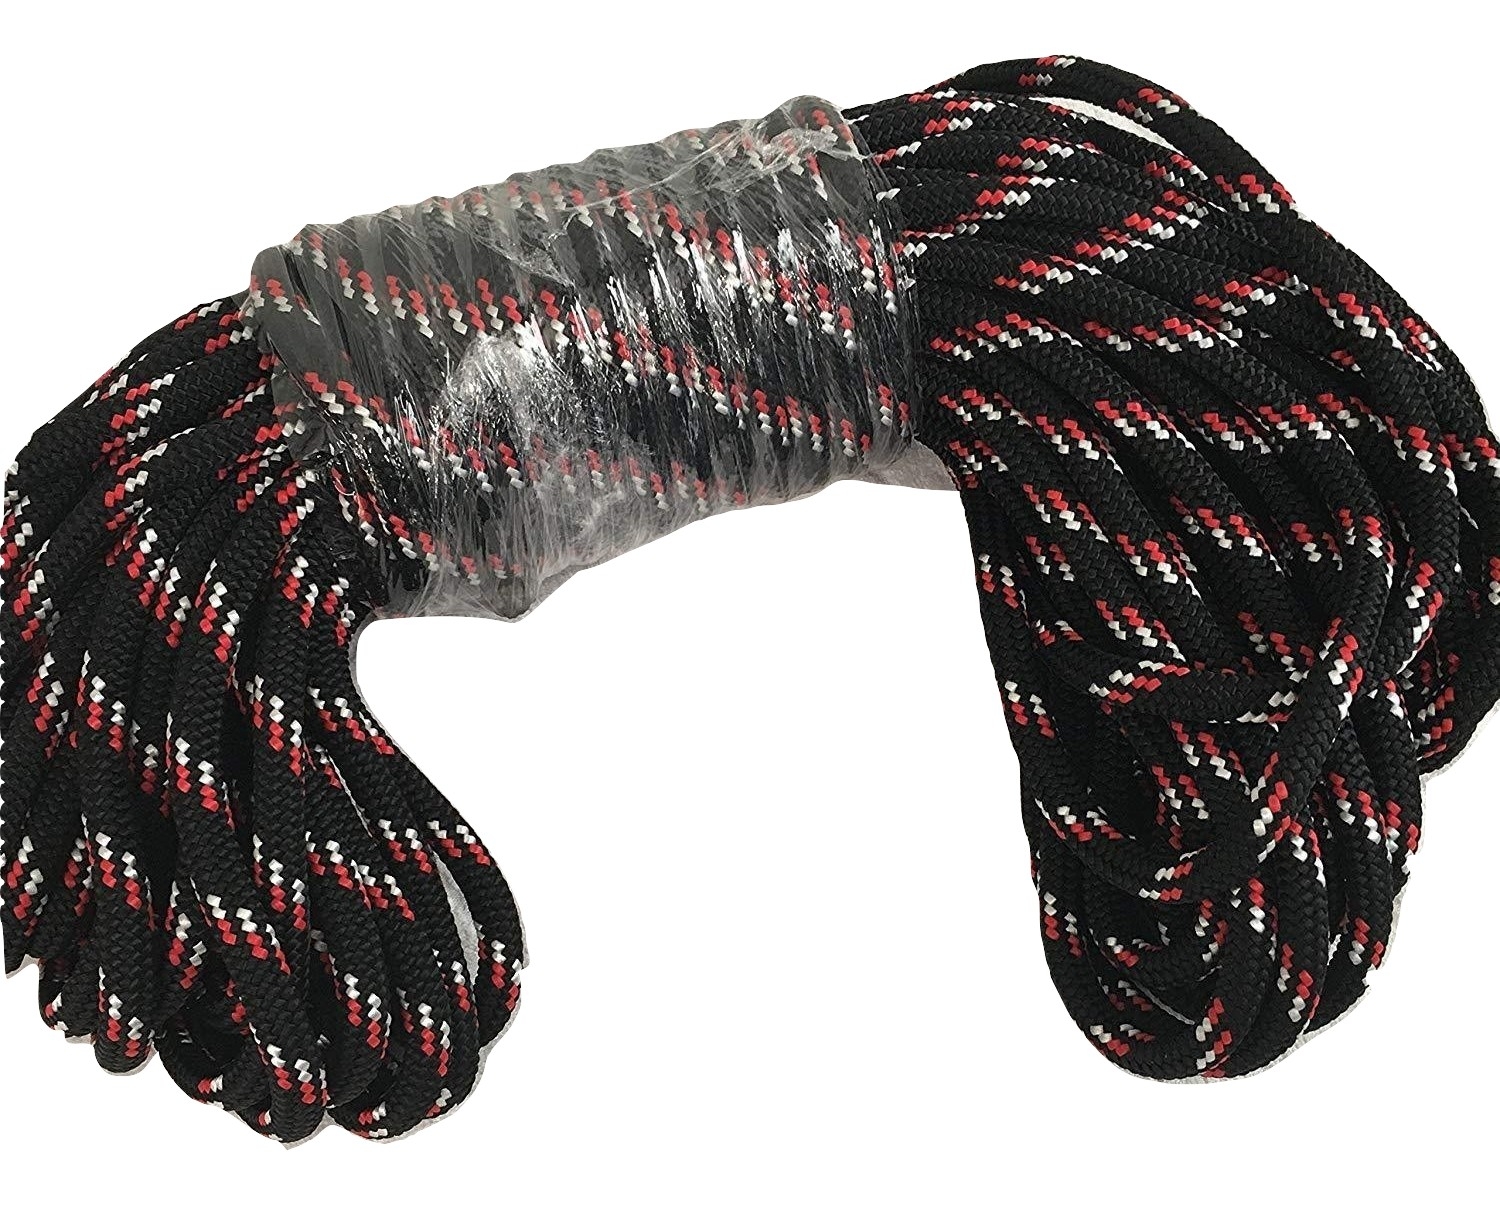 3/8 x 100 ft. Premium Double Braid/Yacht Braid Polyester Rope